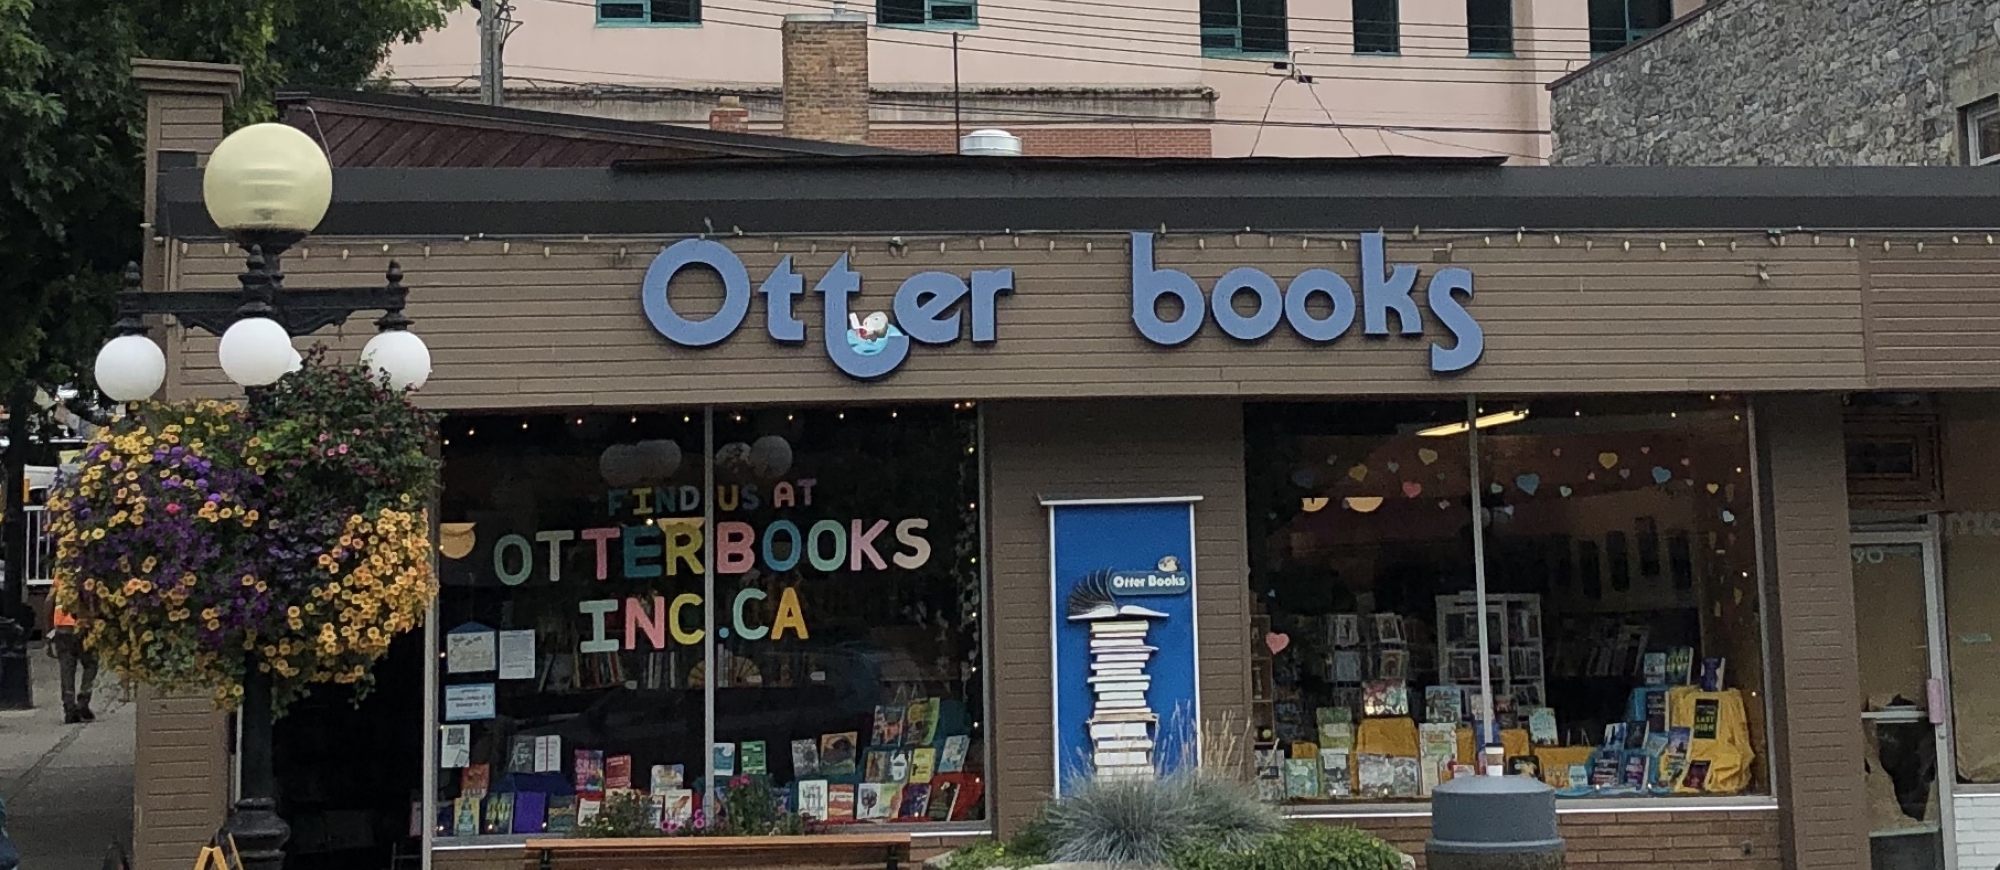 The Otter Books building downtown on Baker Street in Nelson BC